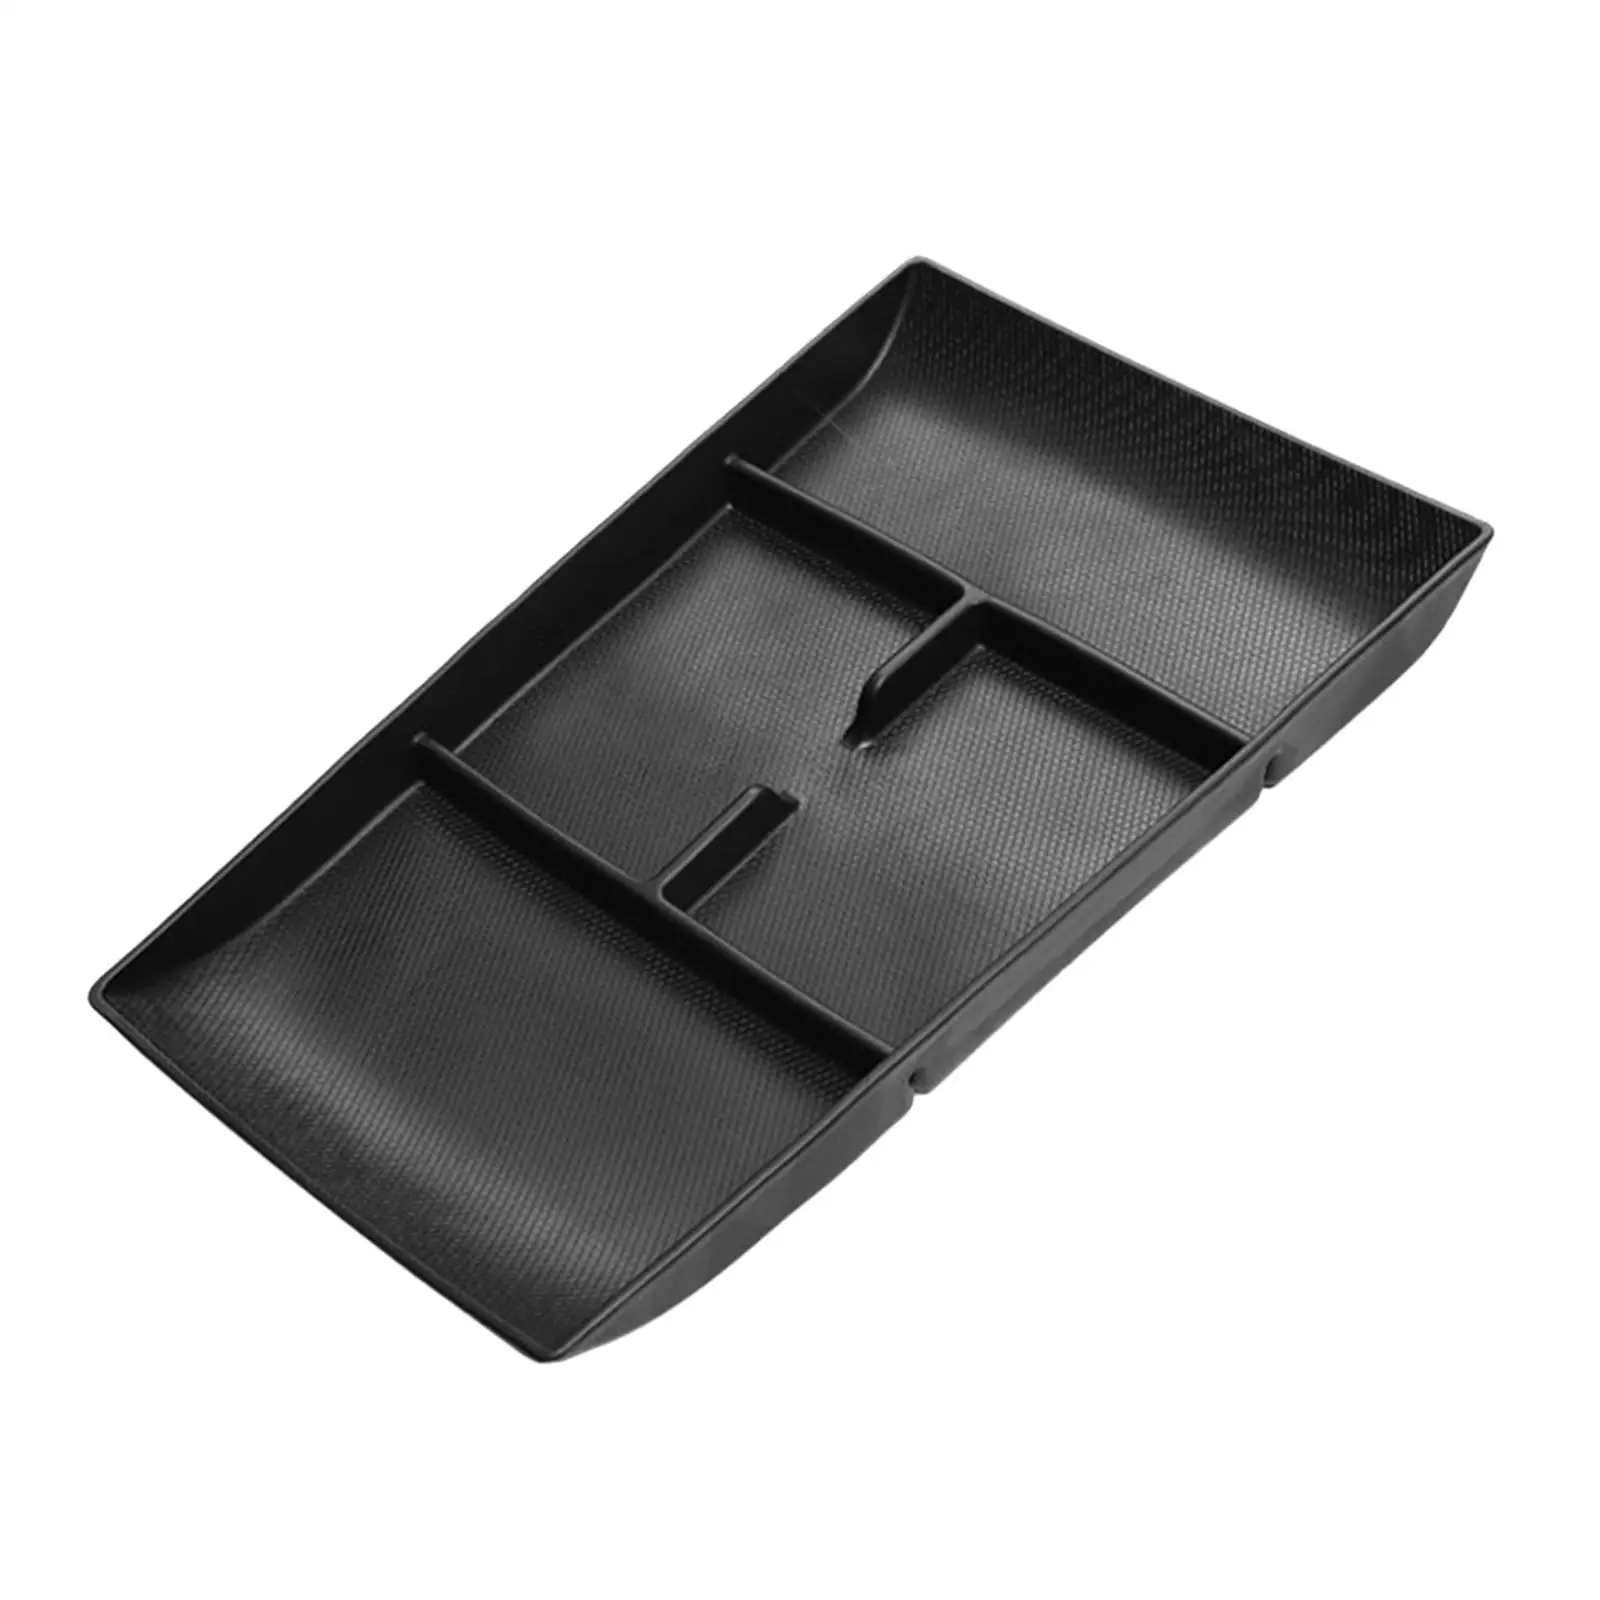 Auto Center Console Storage Tray Console Storage Tray Organizer Central Control Organizer Armrests Storage Box for Byd Seal